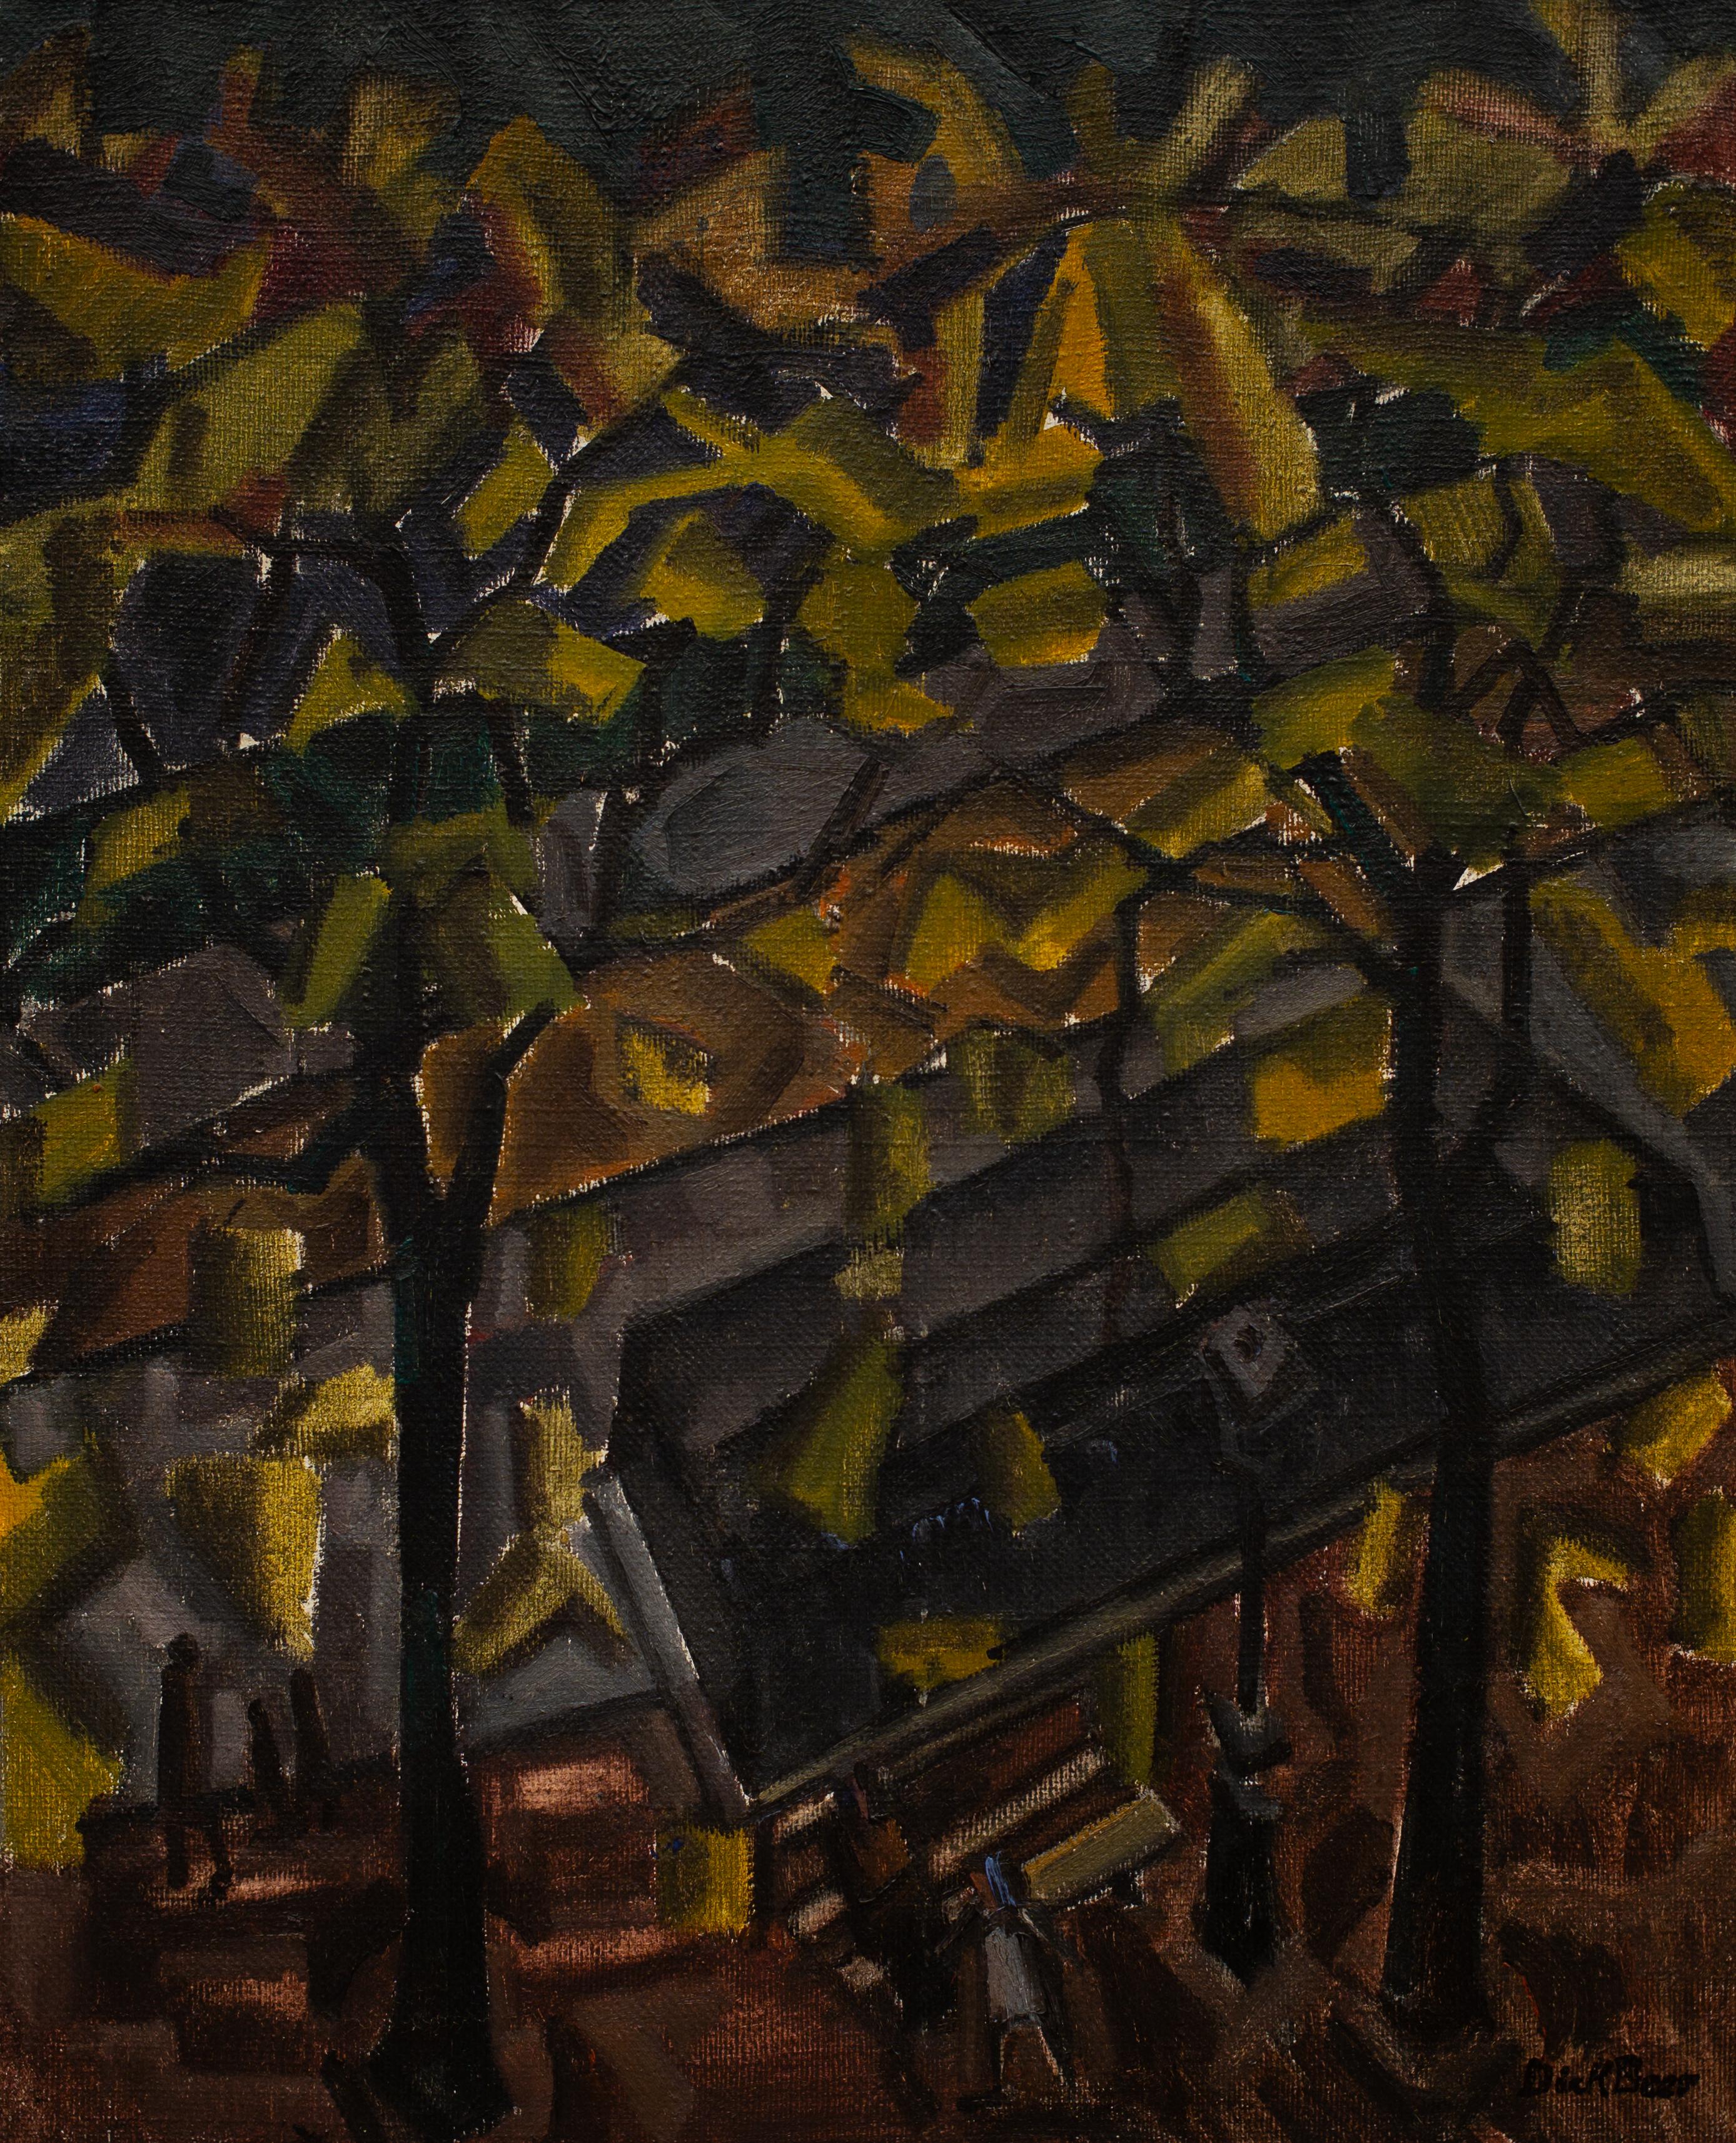 Cubist Painting By Swedish Artist Dick Beer, View From a Window, 1920